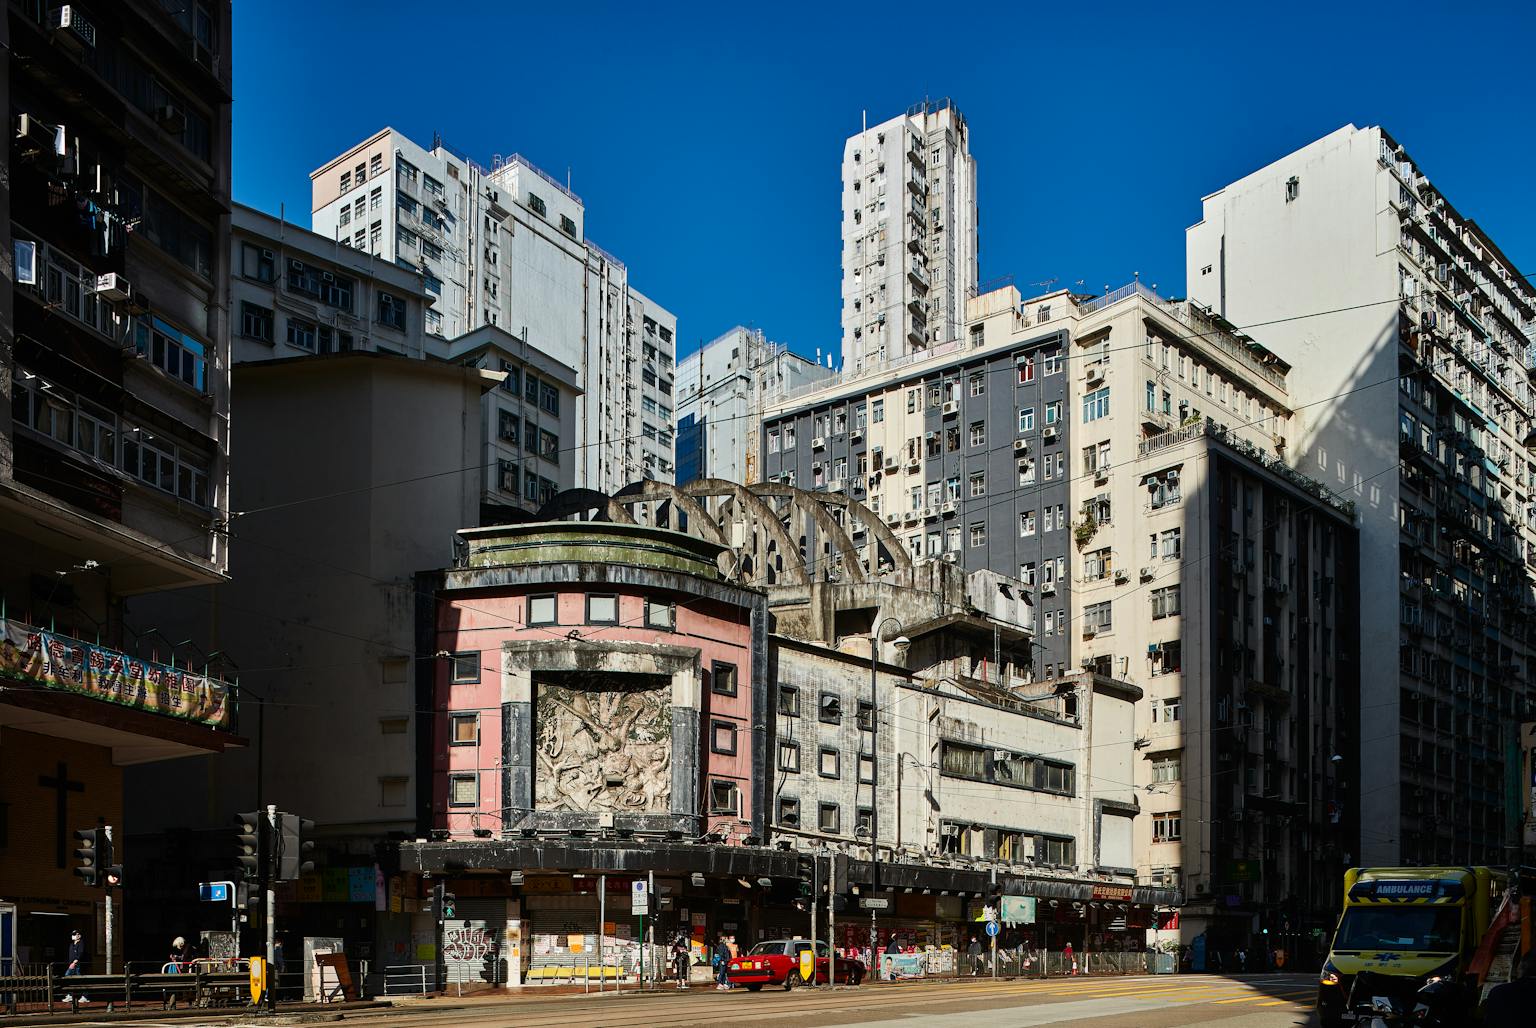 The State Theatre in Hong Kong, where Purcell are acting as Heritage Consultants